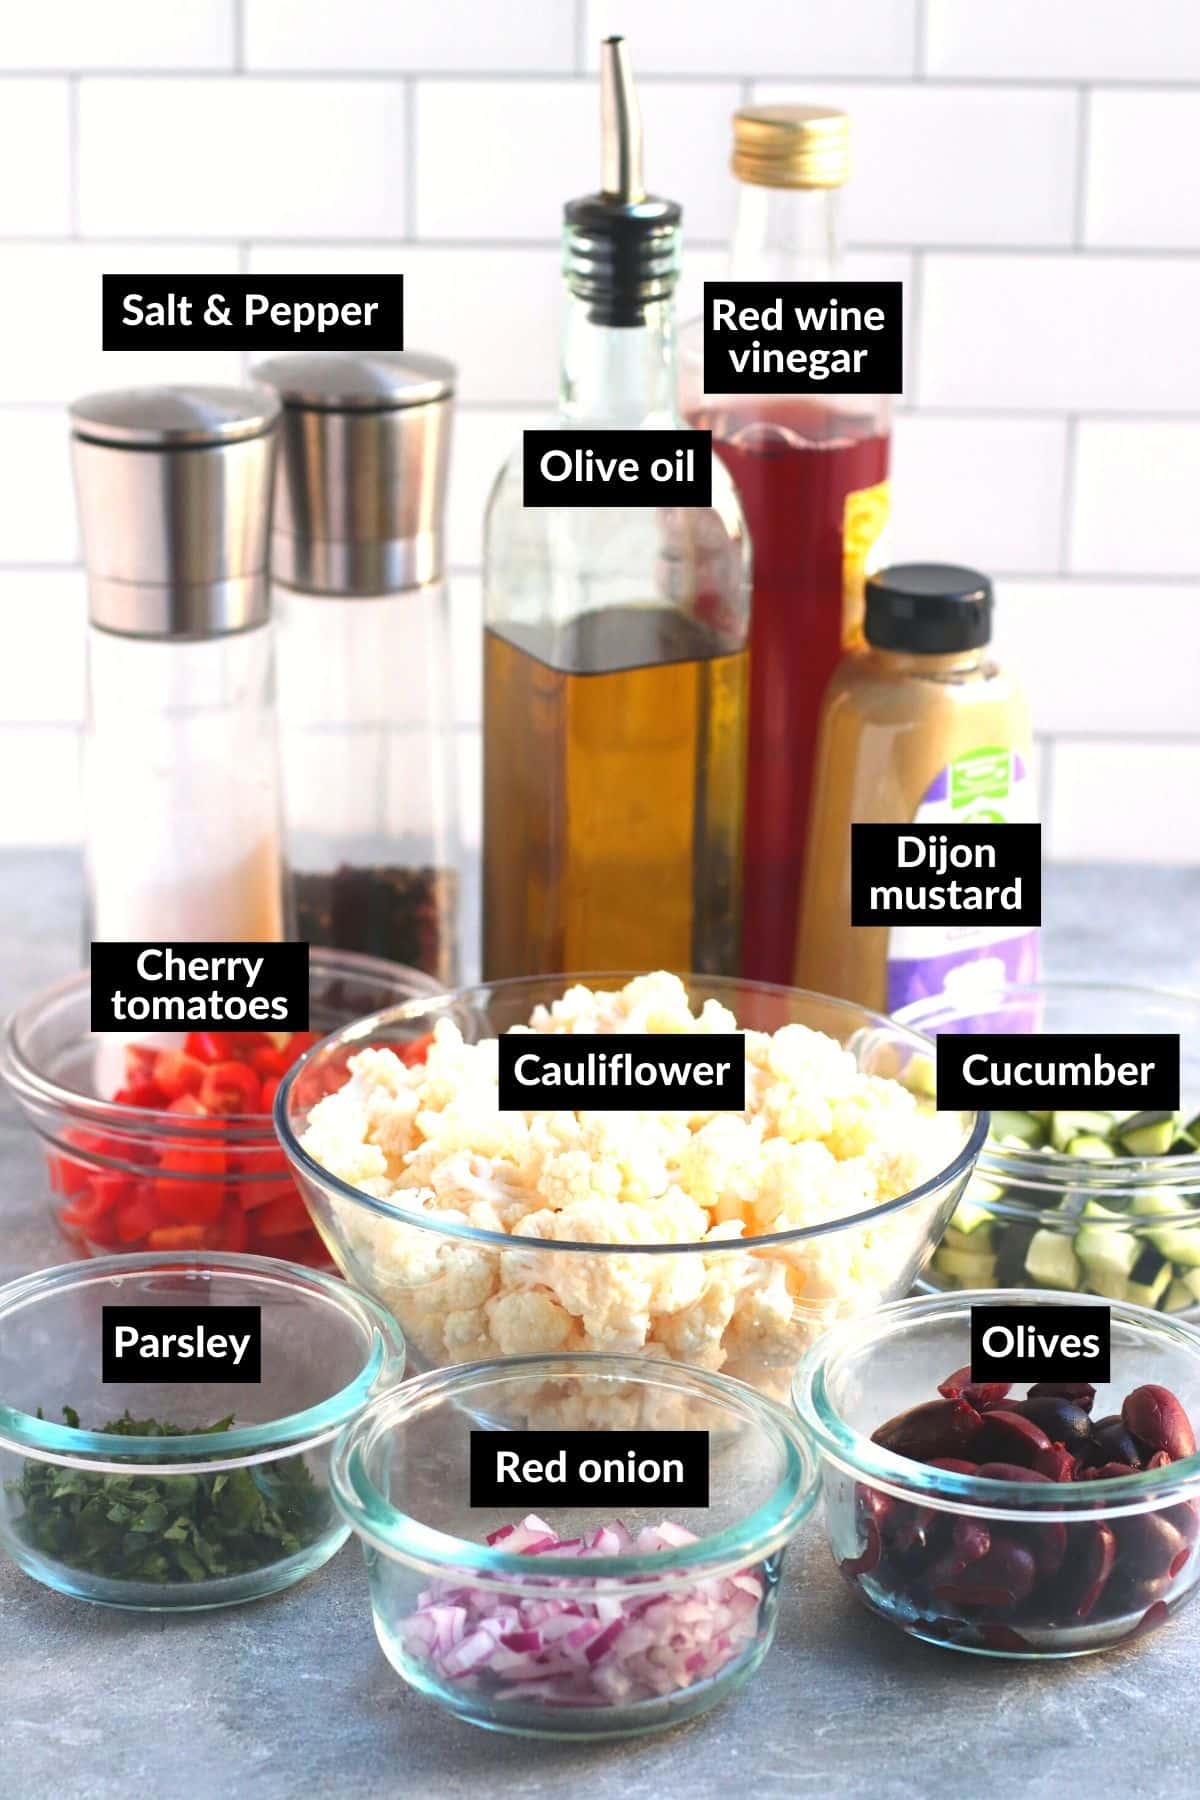 Image of ingredients needed to make this recipe